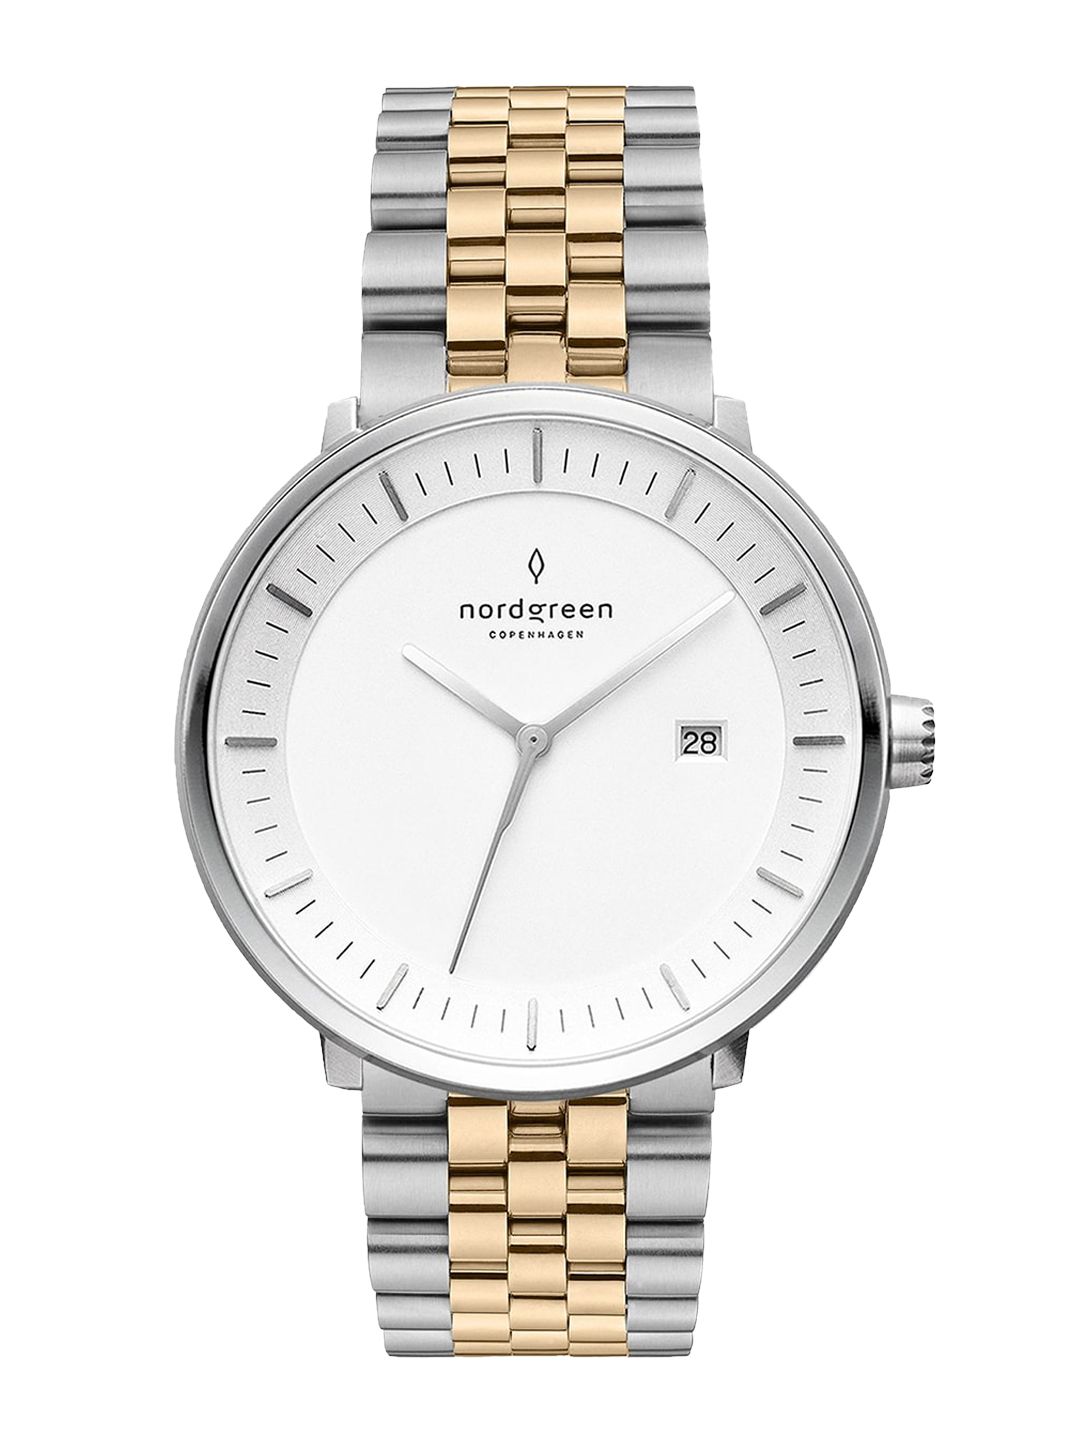 Nordgreen Unisex White Dial & Stainless Steel Philosopher Analogue Watch PH36SI5LSGXX Price in India